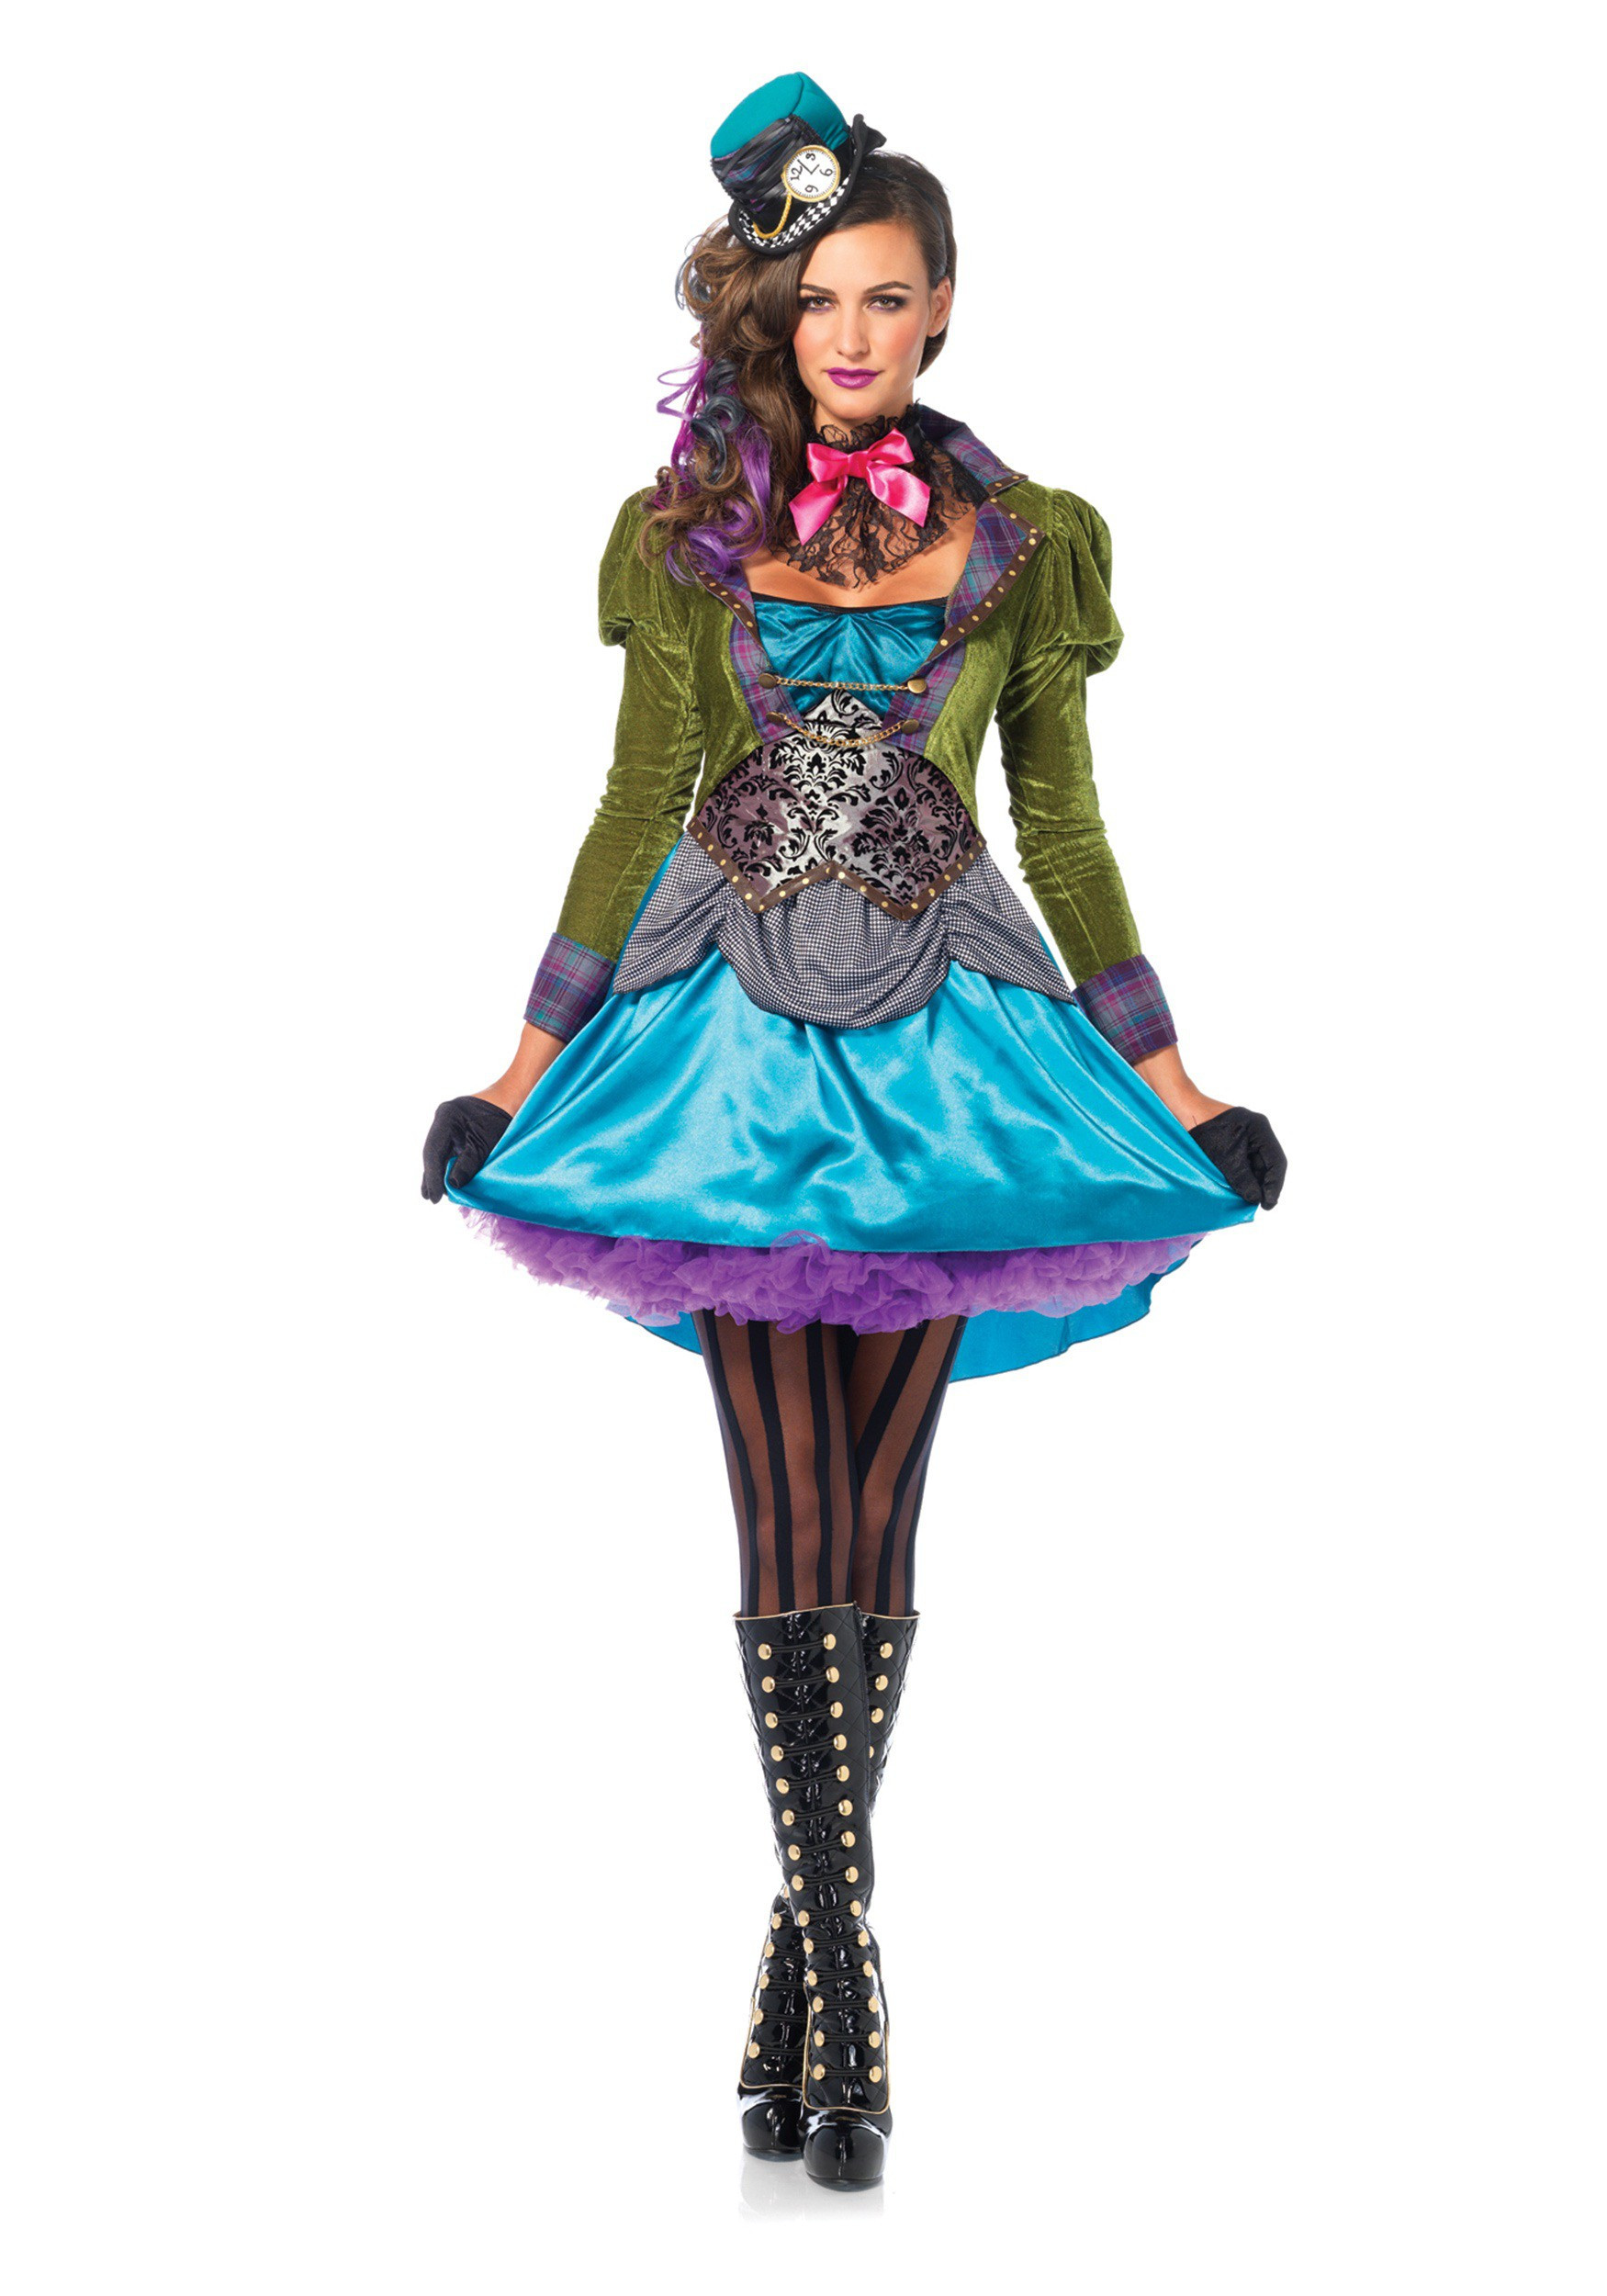 Tea Party Costume Ideas
 Deluxe Mad Hatter Women s Costume